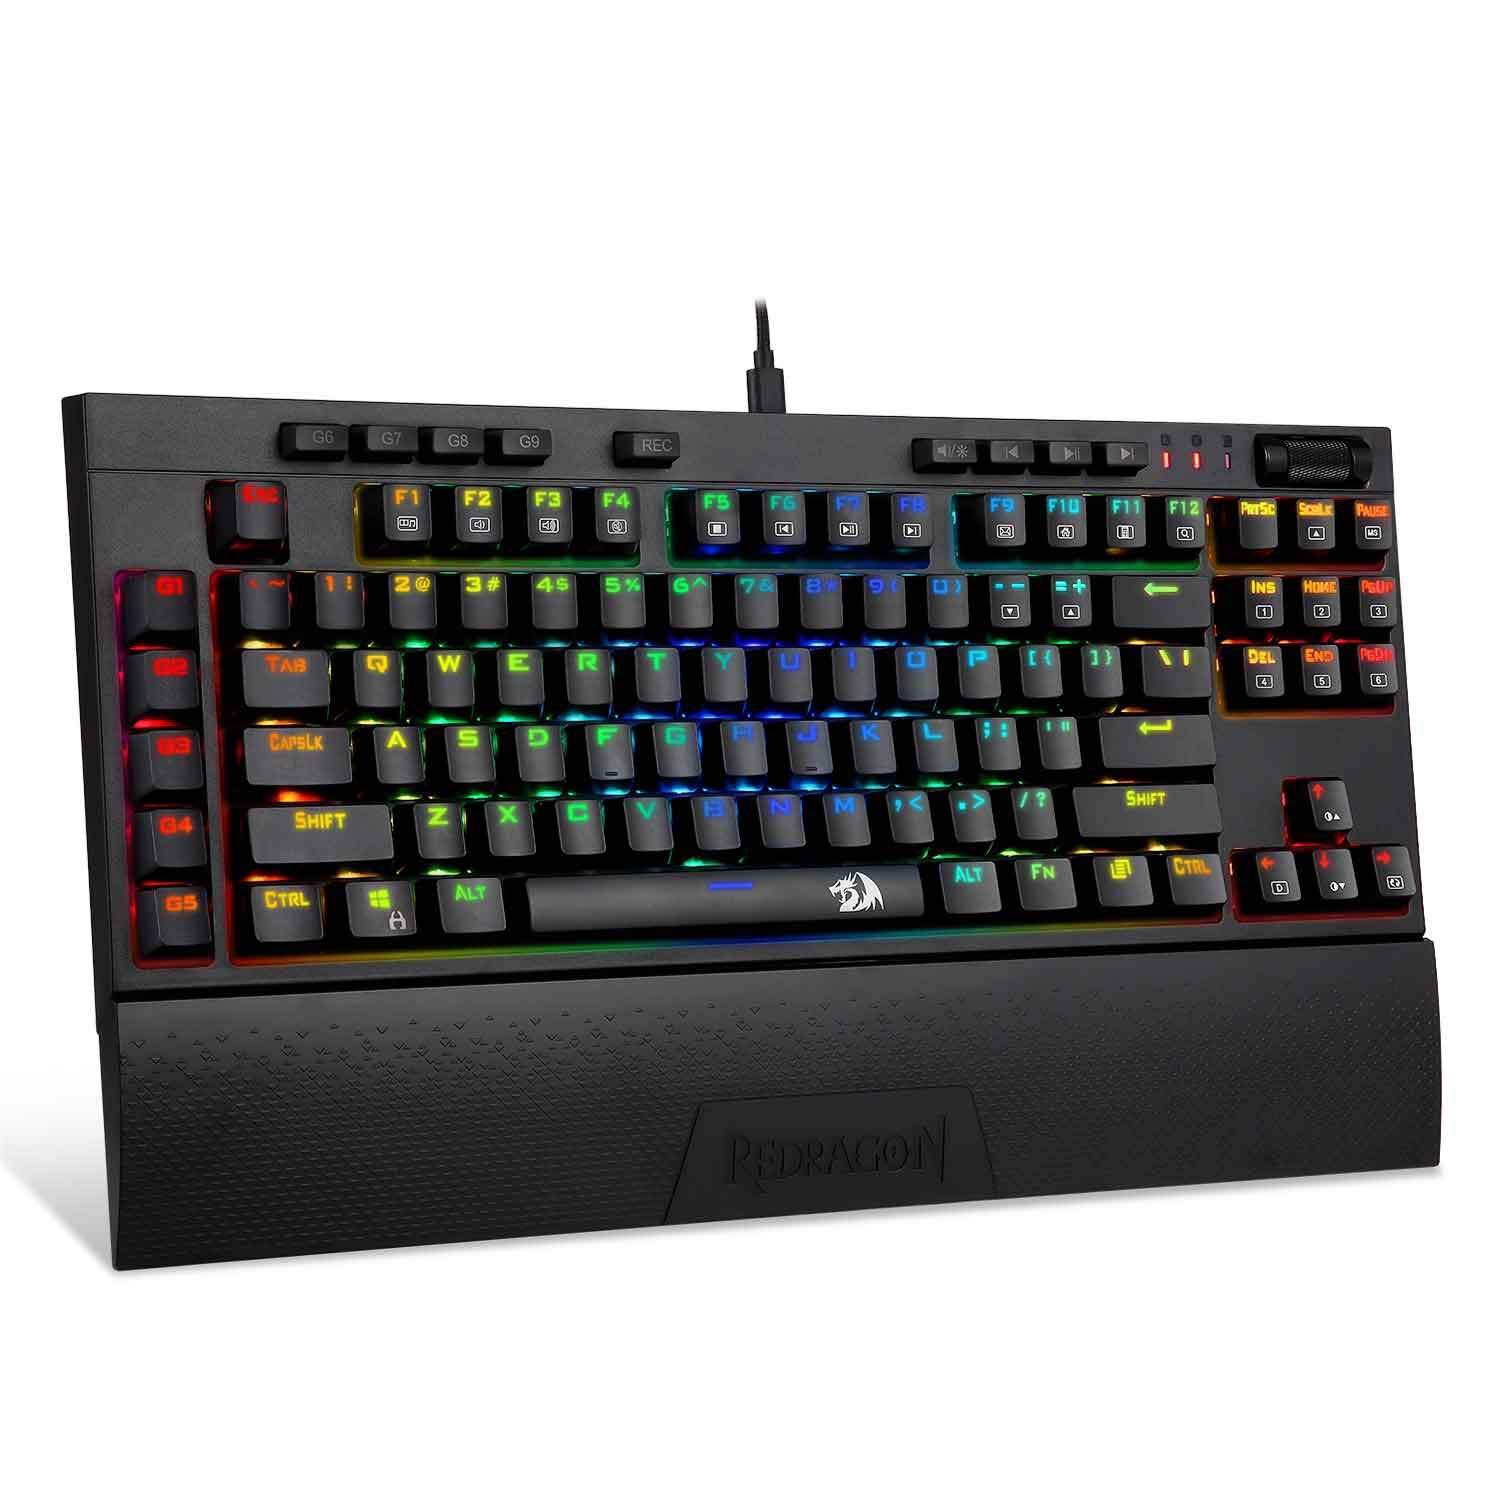 Redragon K588 RGB Backlit Mechanical Gaming Keyboard with Programmable Keys Macro Recording Optical Blue Switches Tenkeyless with Detachable Palm Rest & USB-C USB for Windows PC